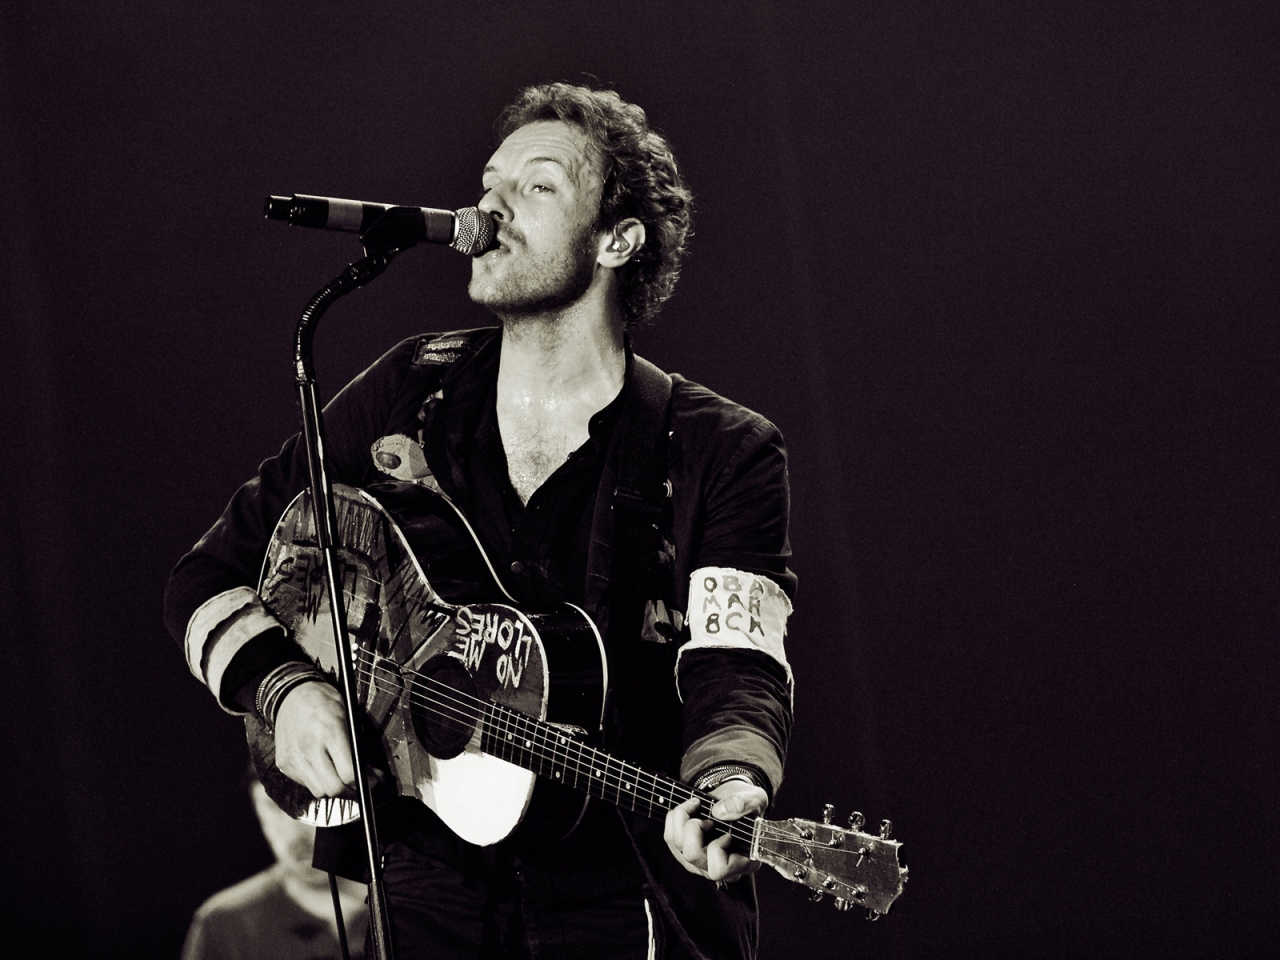 Chris Martin Coldplay for 1280 x 960 resolution